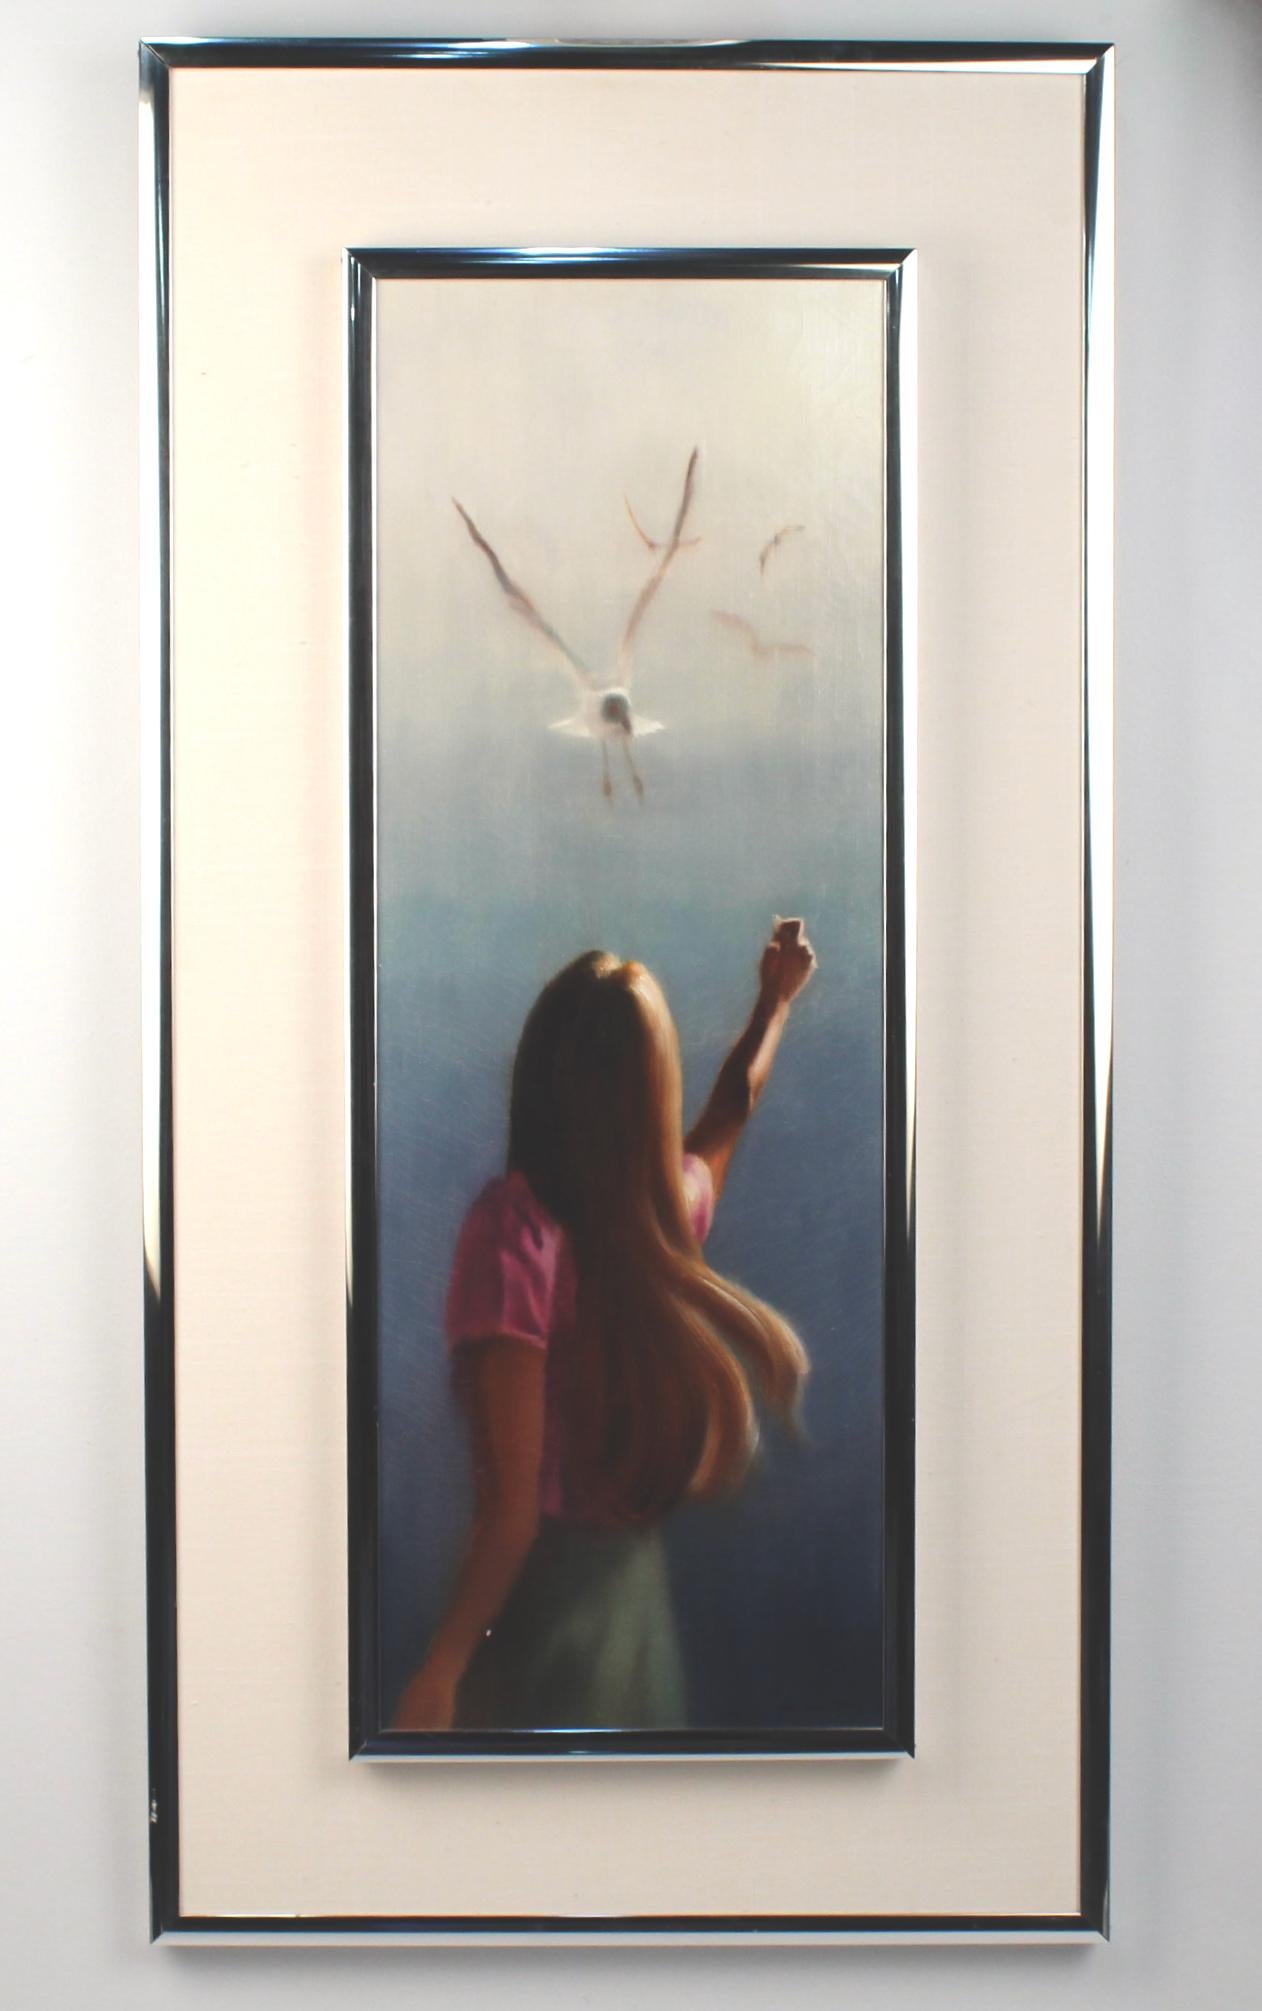 Offered here for your consideration is a 1980s soft-realism oil on canvas painting of a woman and seagulls.

Hal Singer (1919-2003) studied at New York University and the Art Students League. He was represented in East Coast galleries and